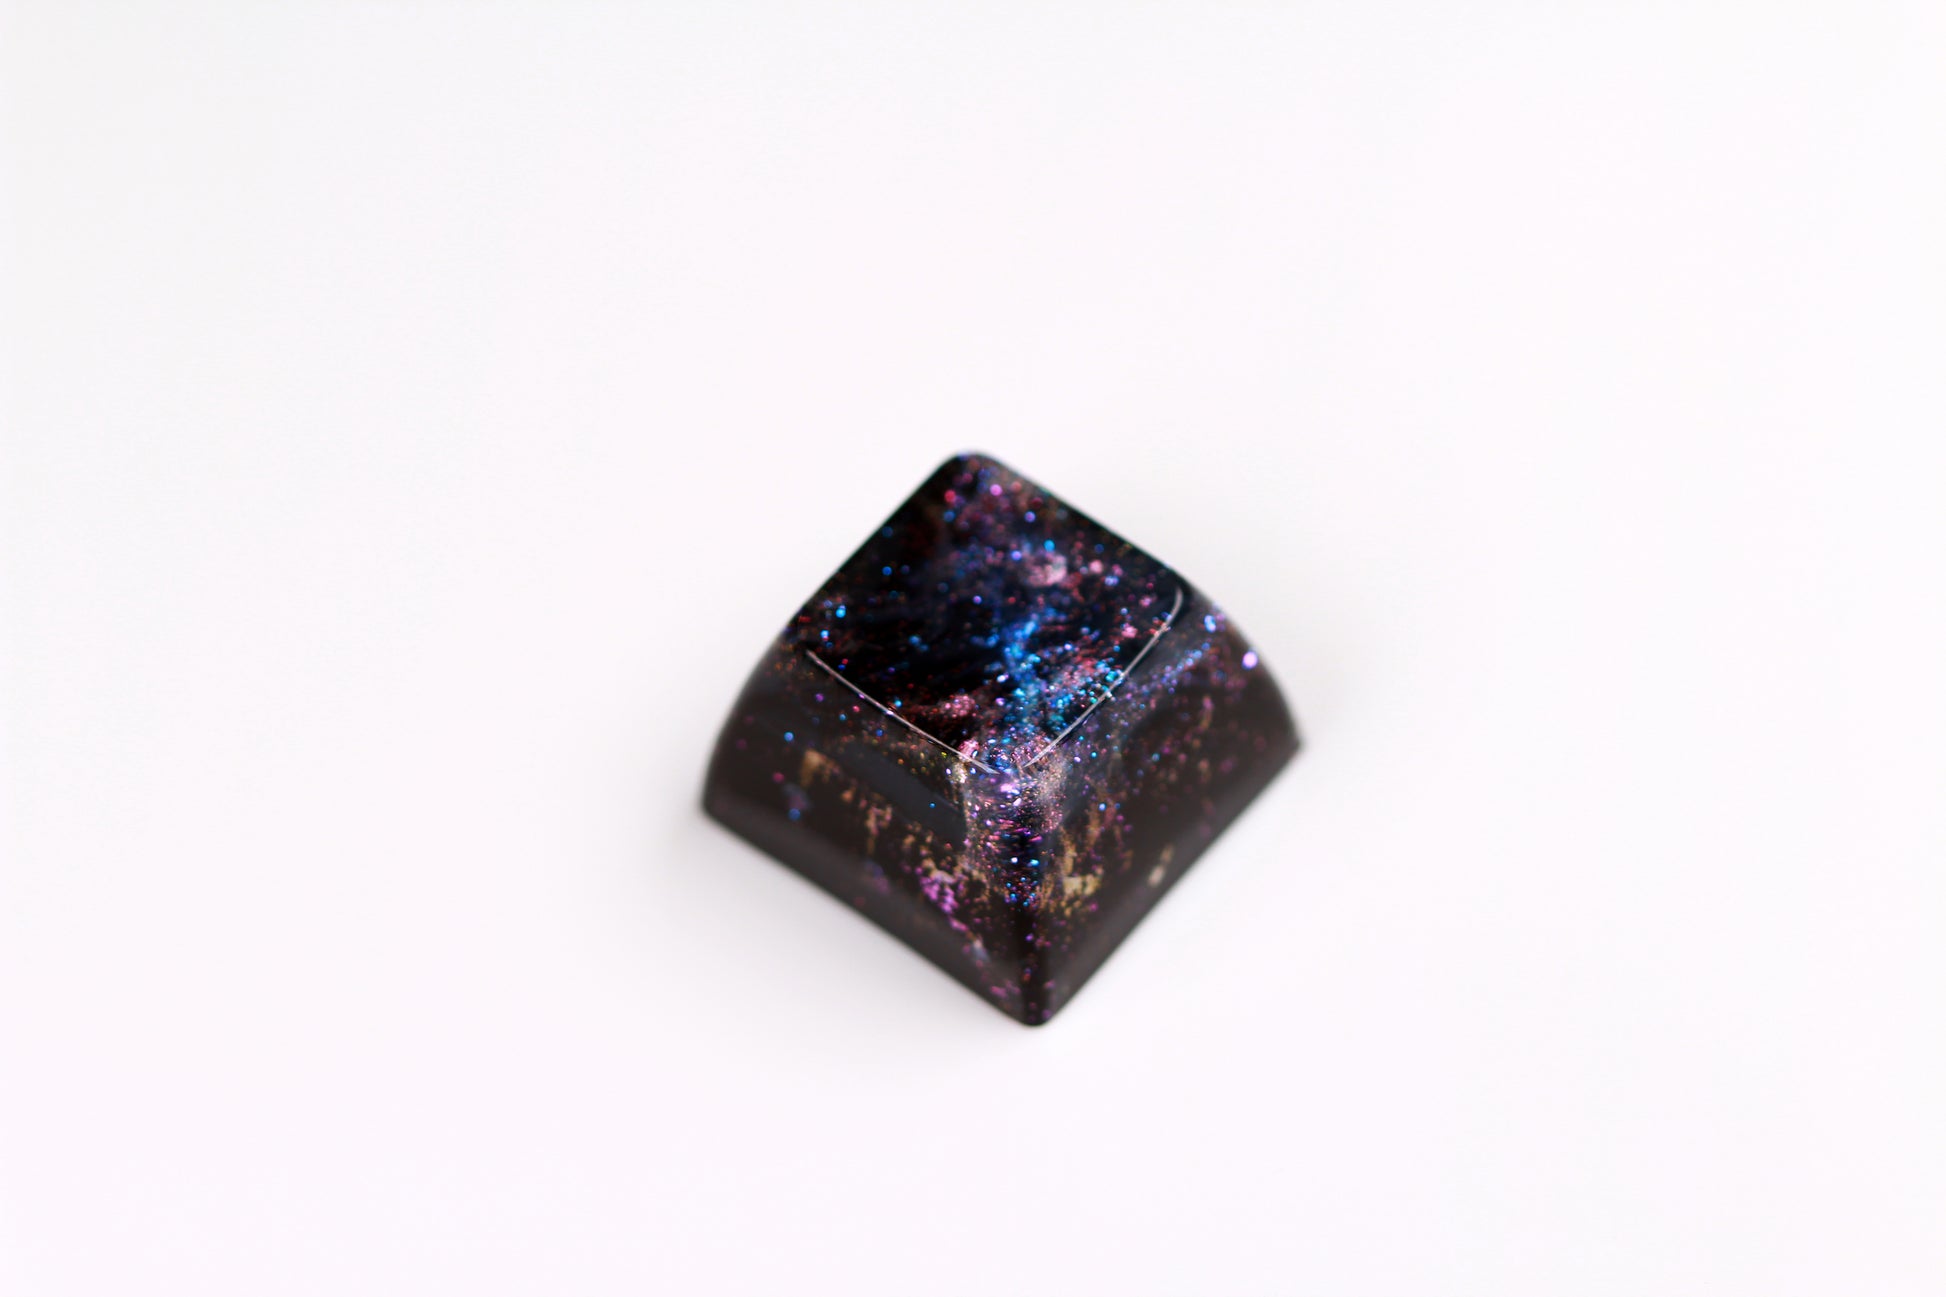 Gimpy SA Row 3 - Deep Field Particle Stream 2 - PrimeCaps Keycap - Blank and Sculpted Artisan Keycaps for cherry MX mechanical keyboards 